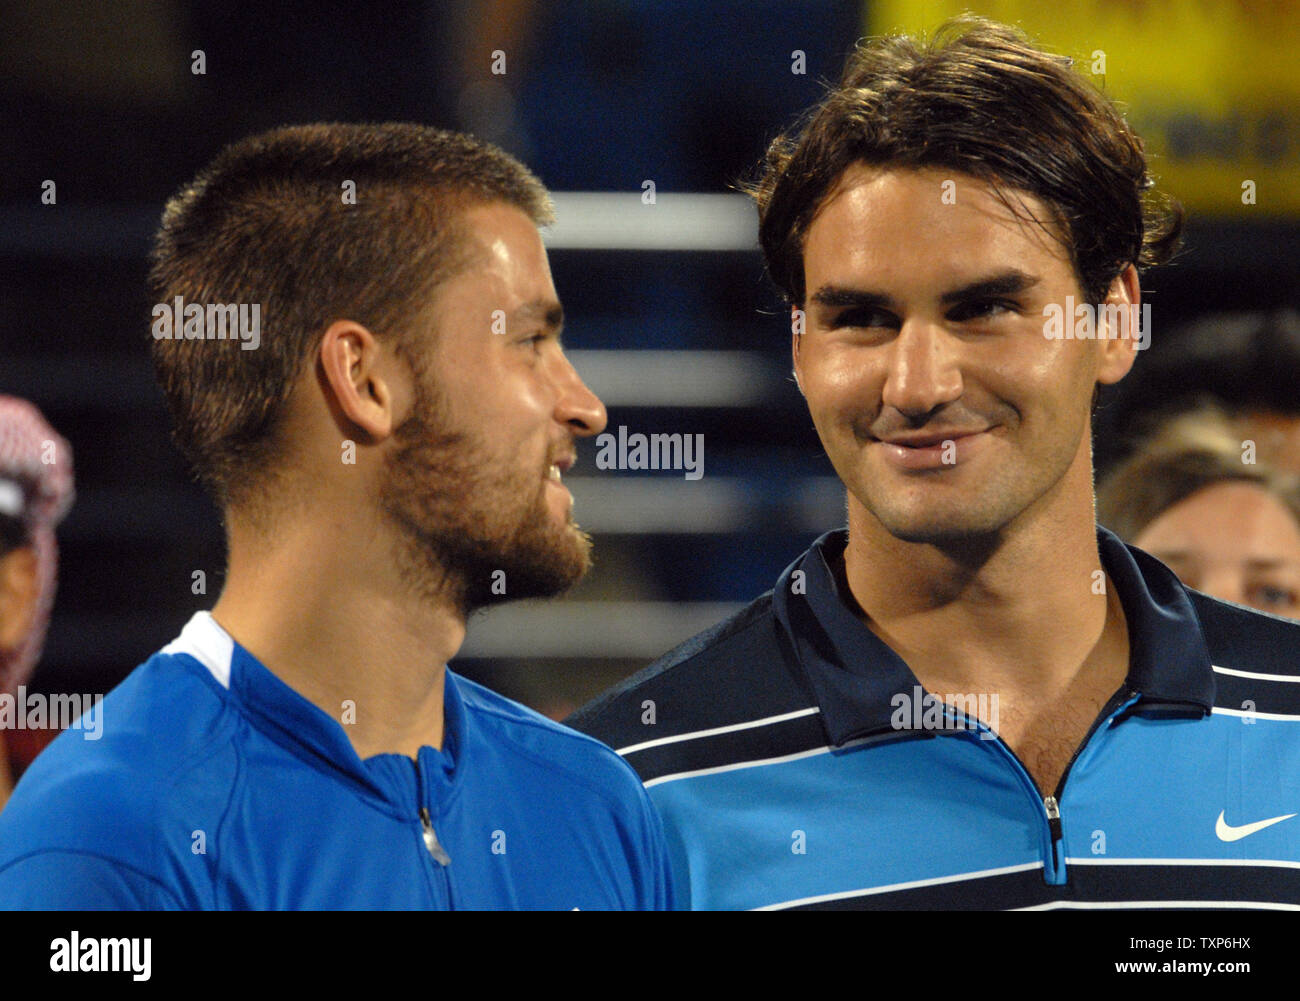 The world's number one tennis player Roger Federer (R) speaks with Russia's  Mikhail Youzhny during awards ceremony after Federer defeated Youzhney 6-4  6-3 in the finals of the Men's Dubai Tennis Championships